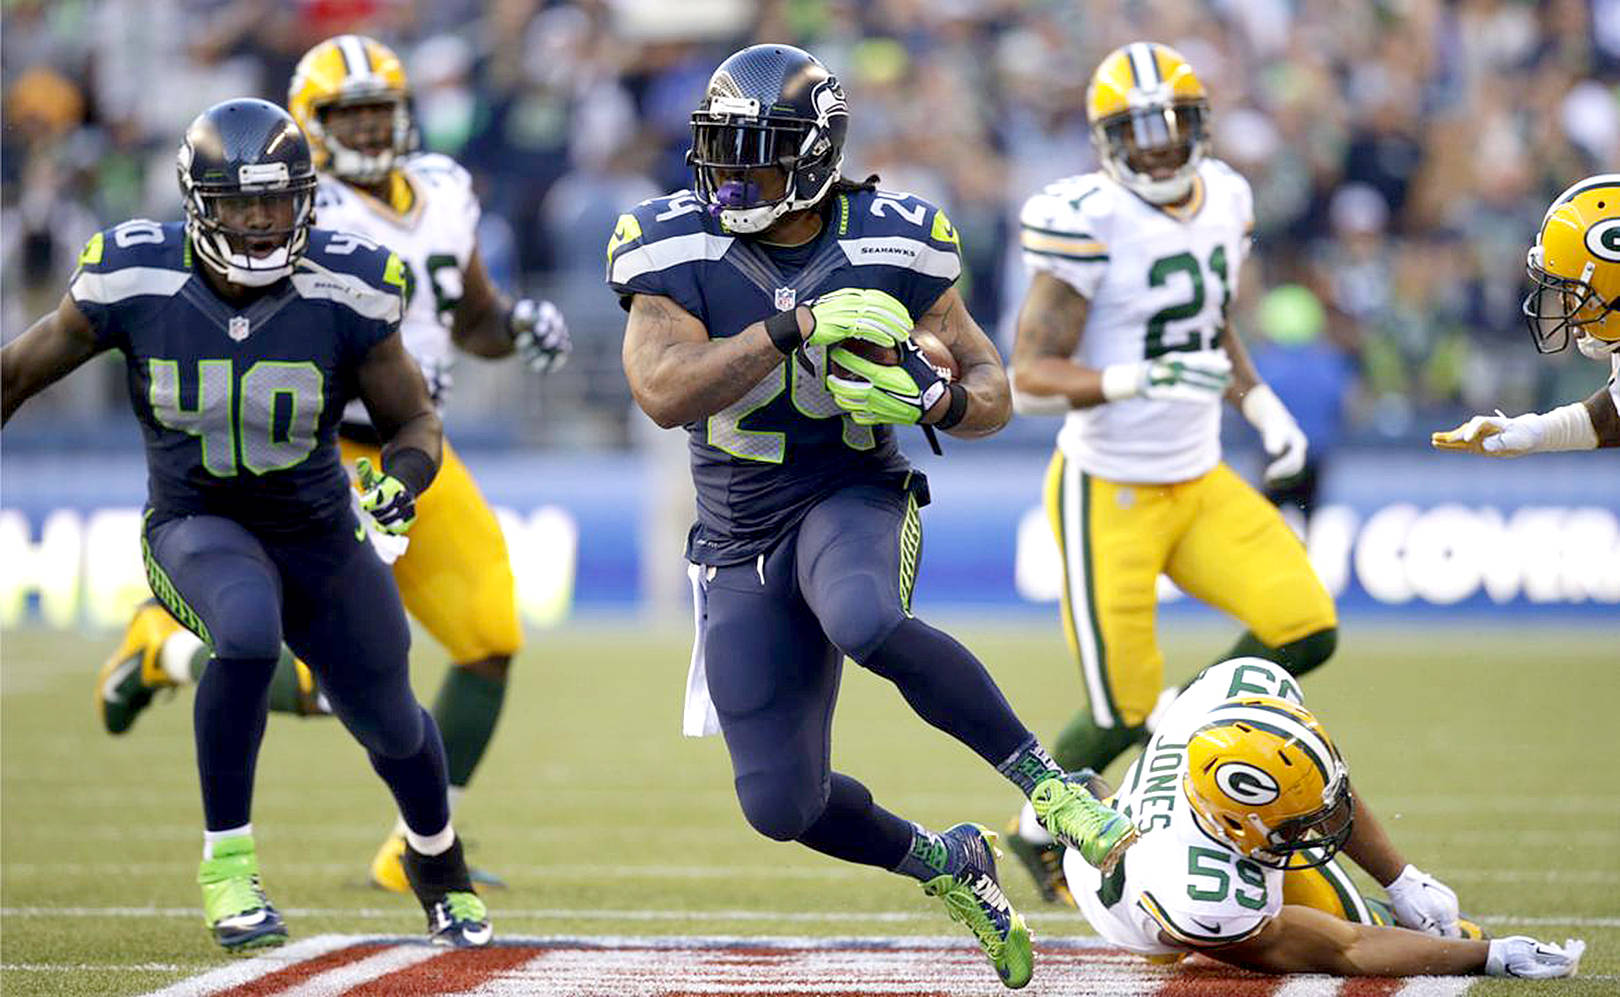 Marshawn Lynch of the Seattle Seahawks runs against the Green Bay Packers in Seattle in the NFC Championship game in January 2015. (The Associated Press)